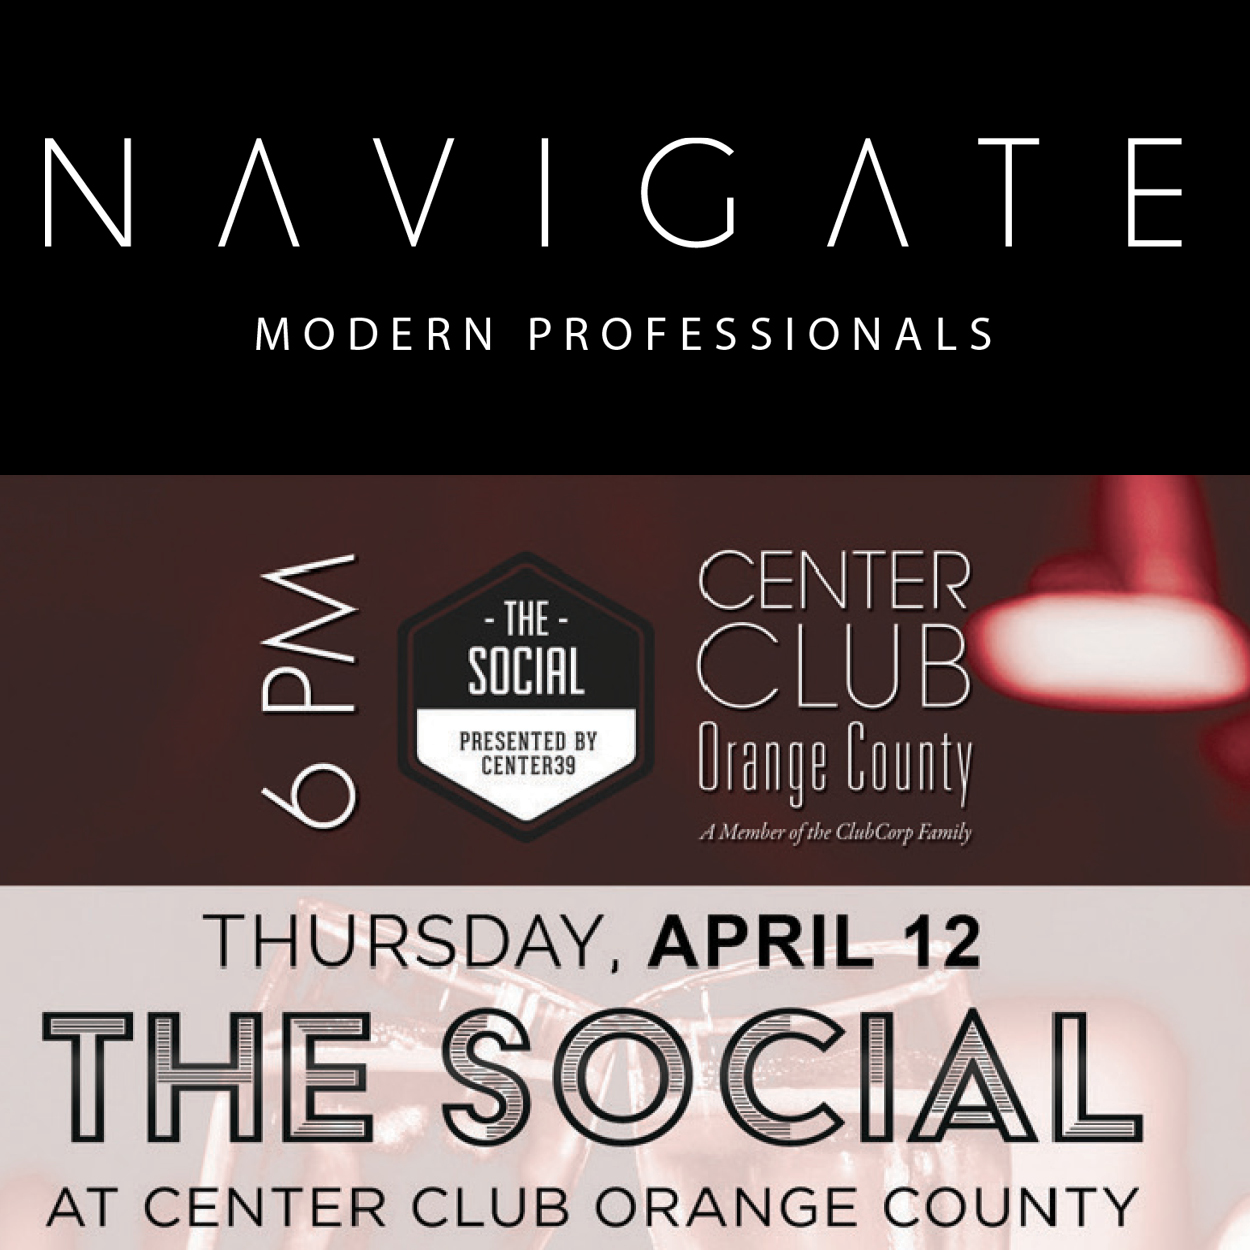 NAVIGATE: The Social at the Center Club Orange County